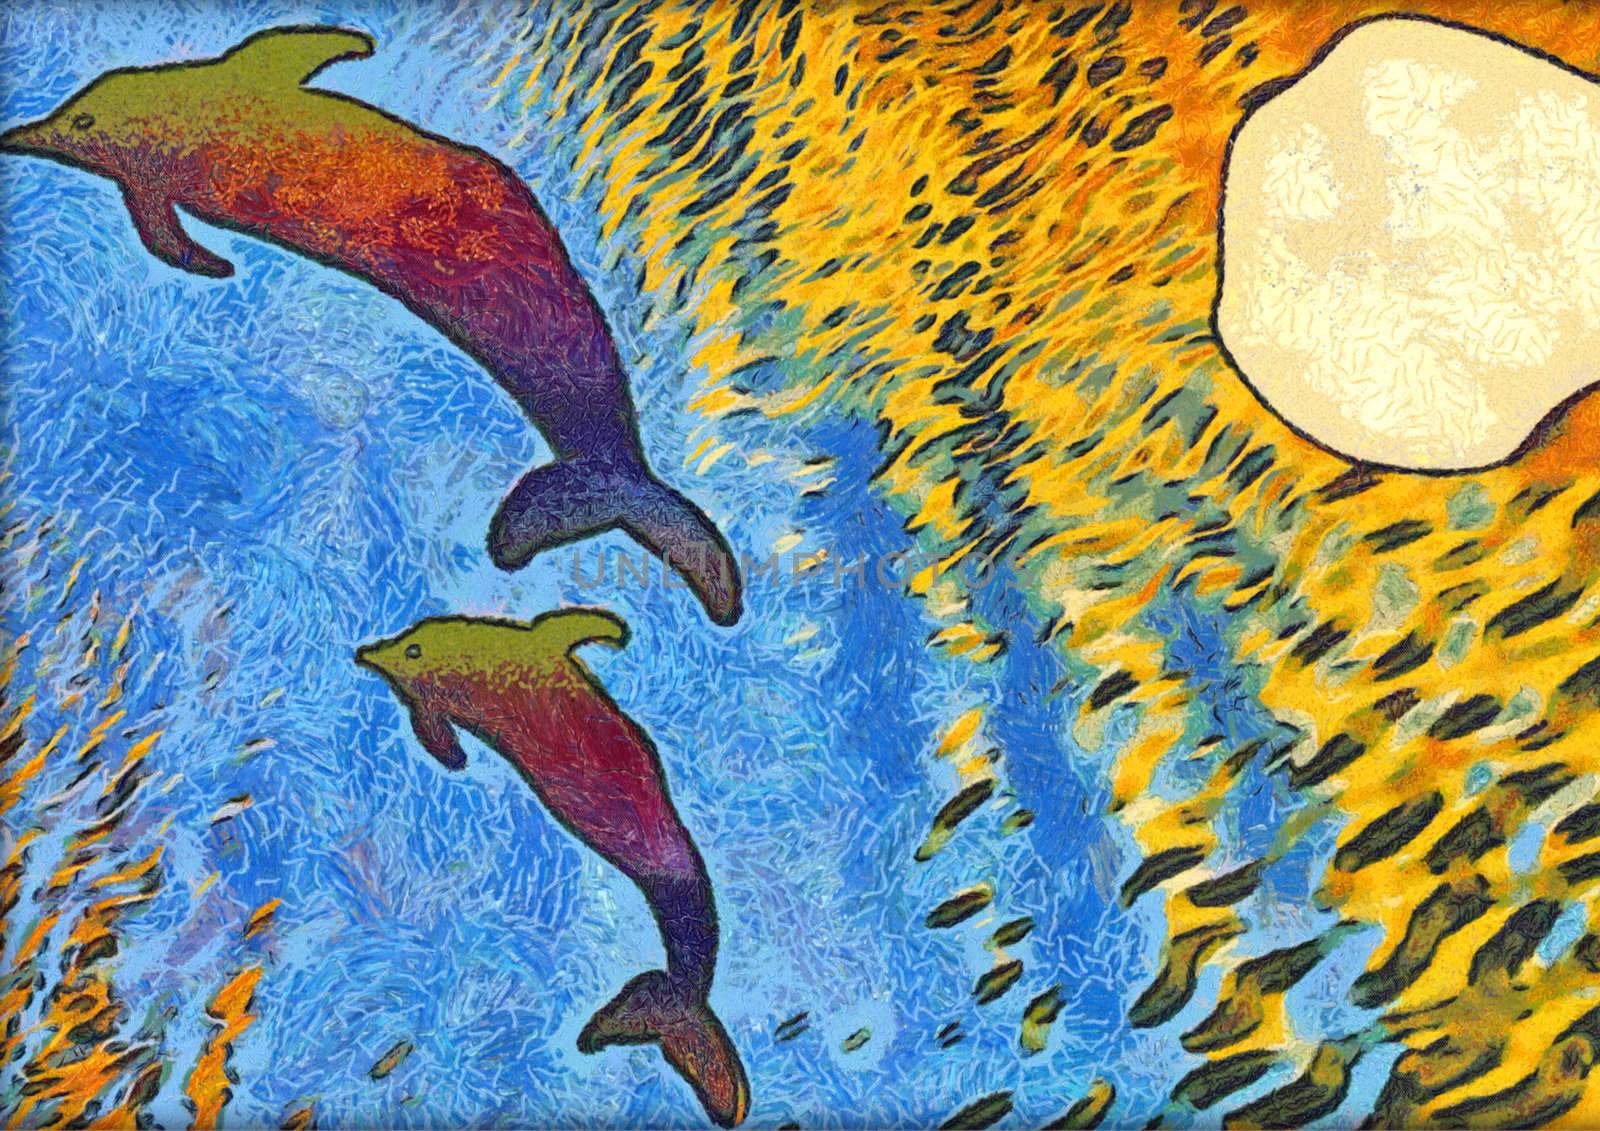 abstract art creative hand-drawn images of the family of dolphins playing